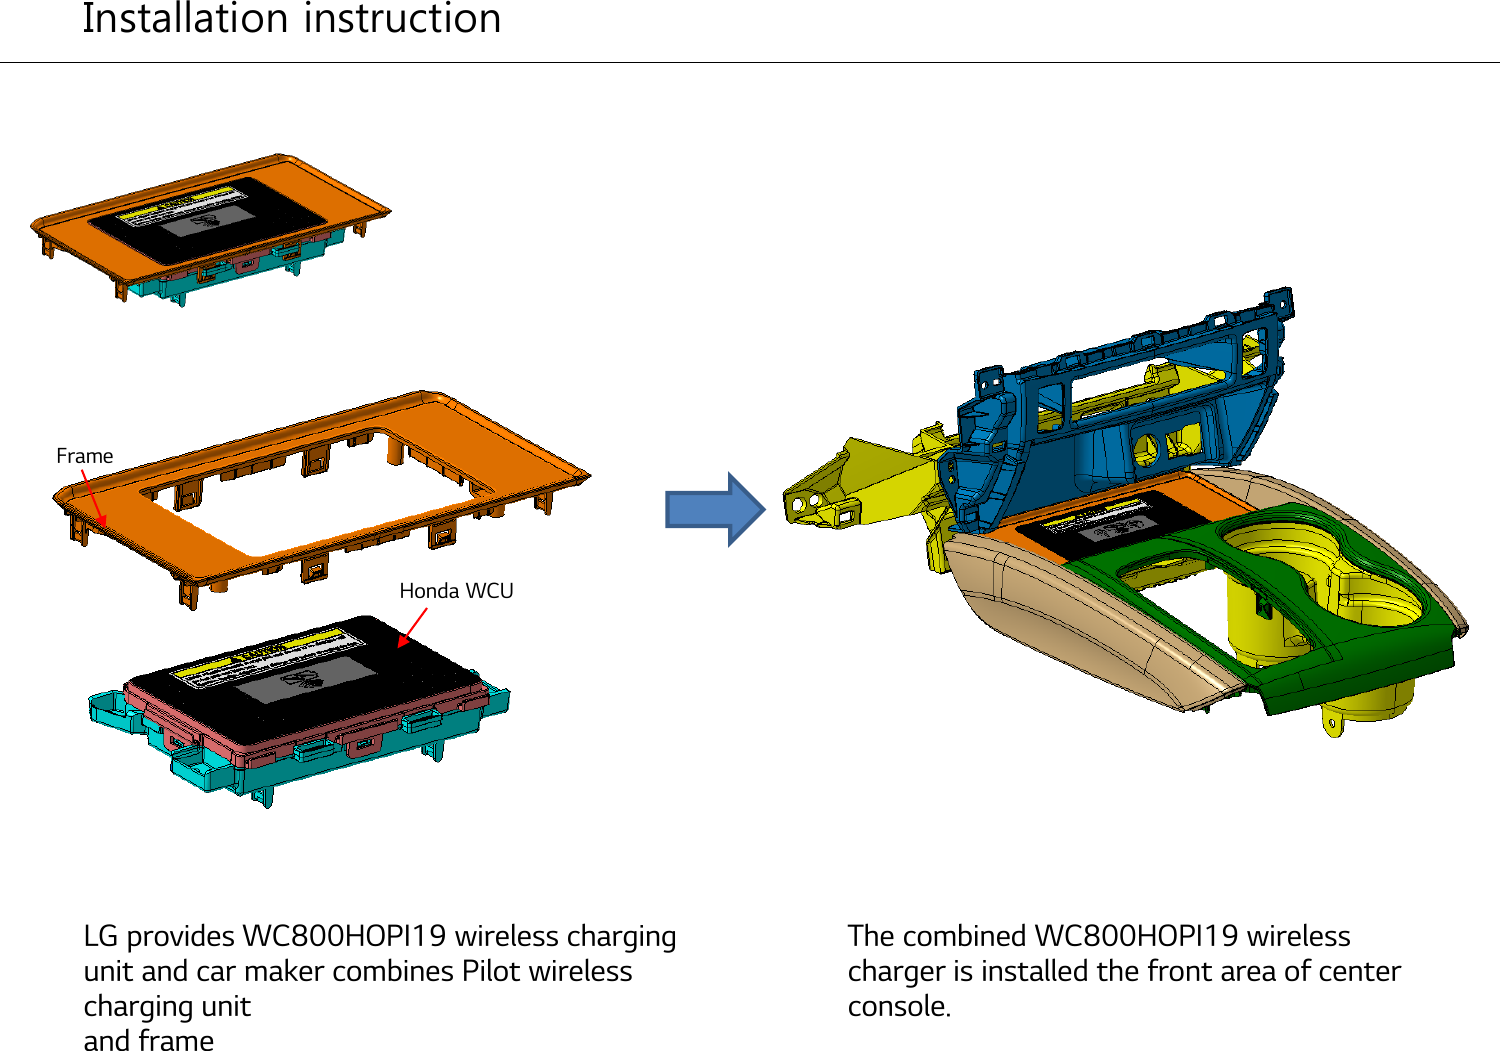 Honda WCU LG provides WC800HOPI19 wireless charging unit and car maker combines Pilot wireless charging unitand frame  The combined WC800HOPI19 wireless charger is installed the front area of center console.Installation instructionFrame